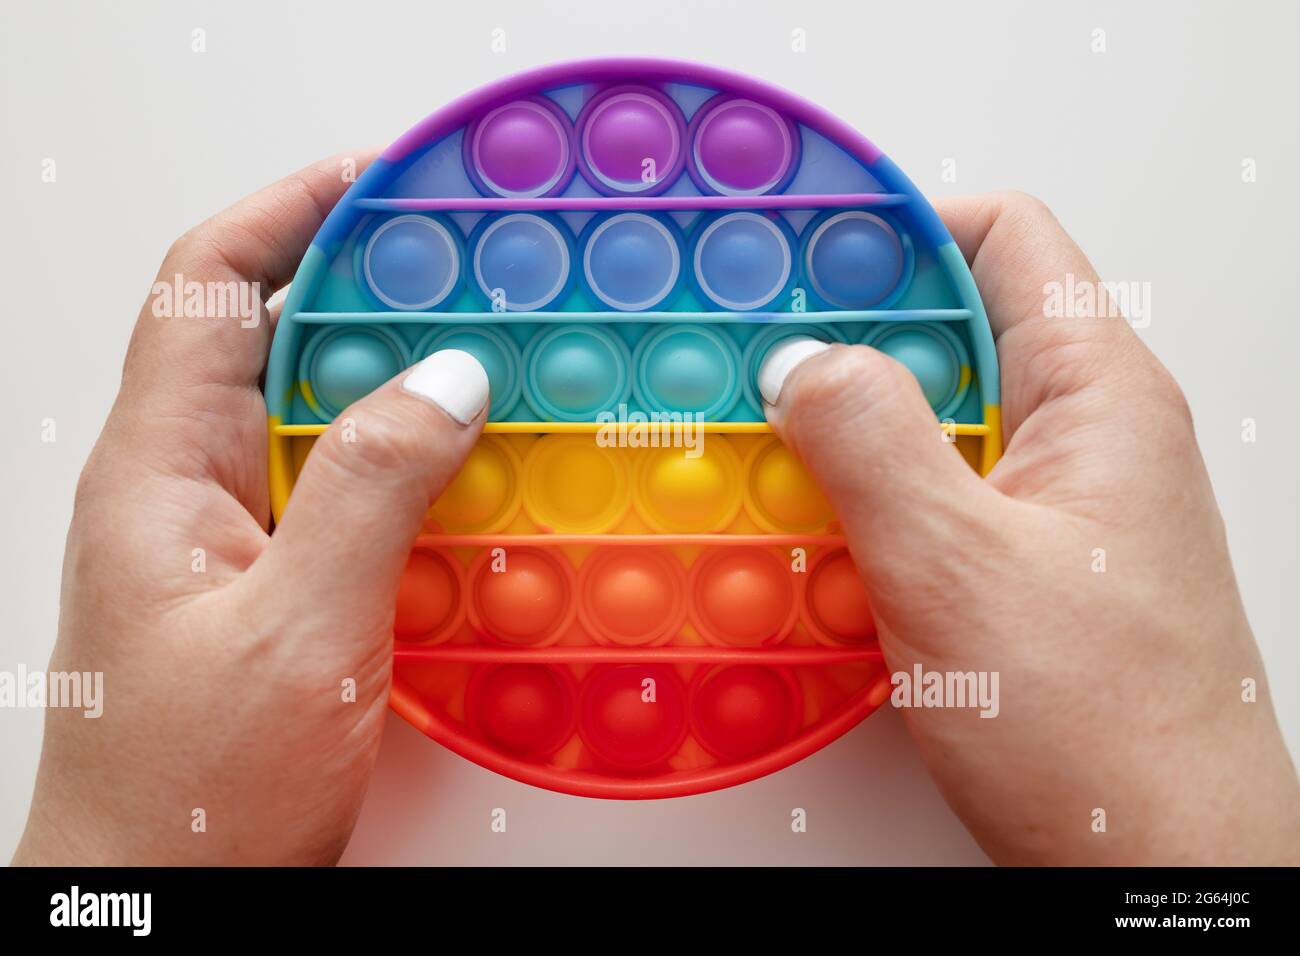 Rainbow sensory fidget isolated in the hand on white background. New trendy silicone toy. Stock Photo